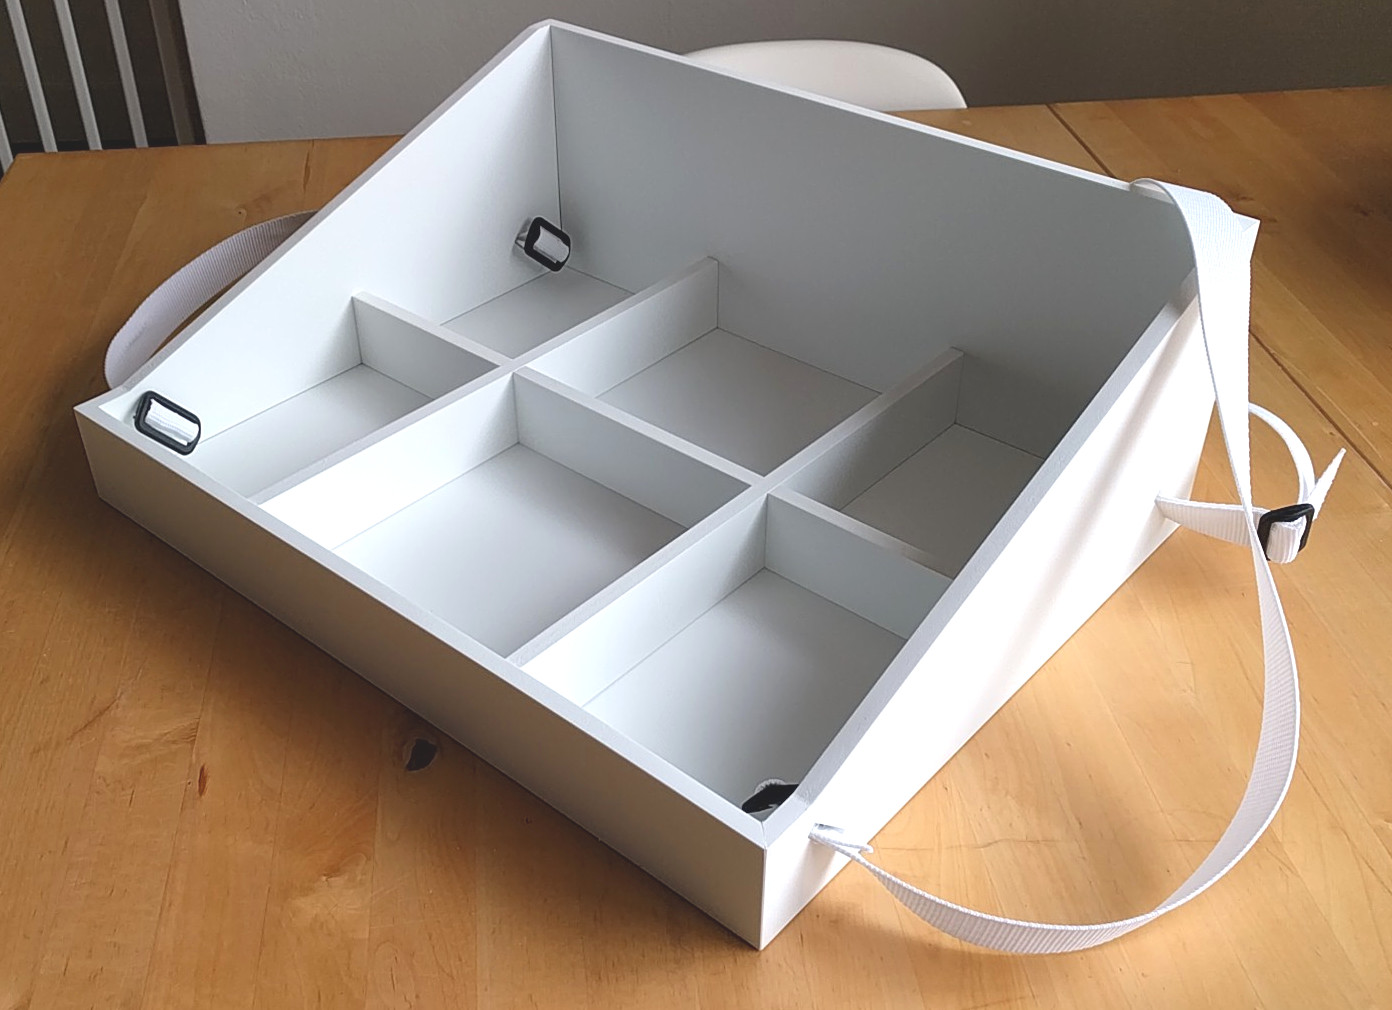 Sampling vending tray with high rear and grid partition